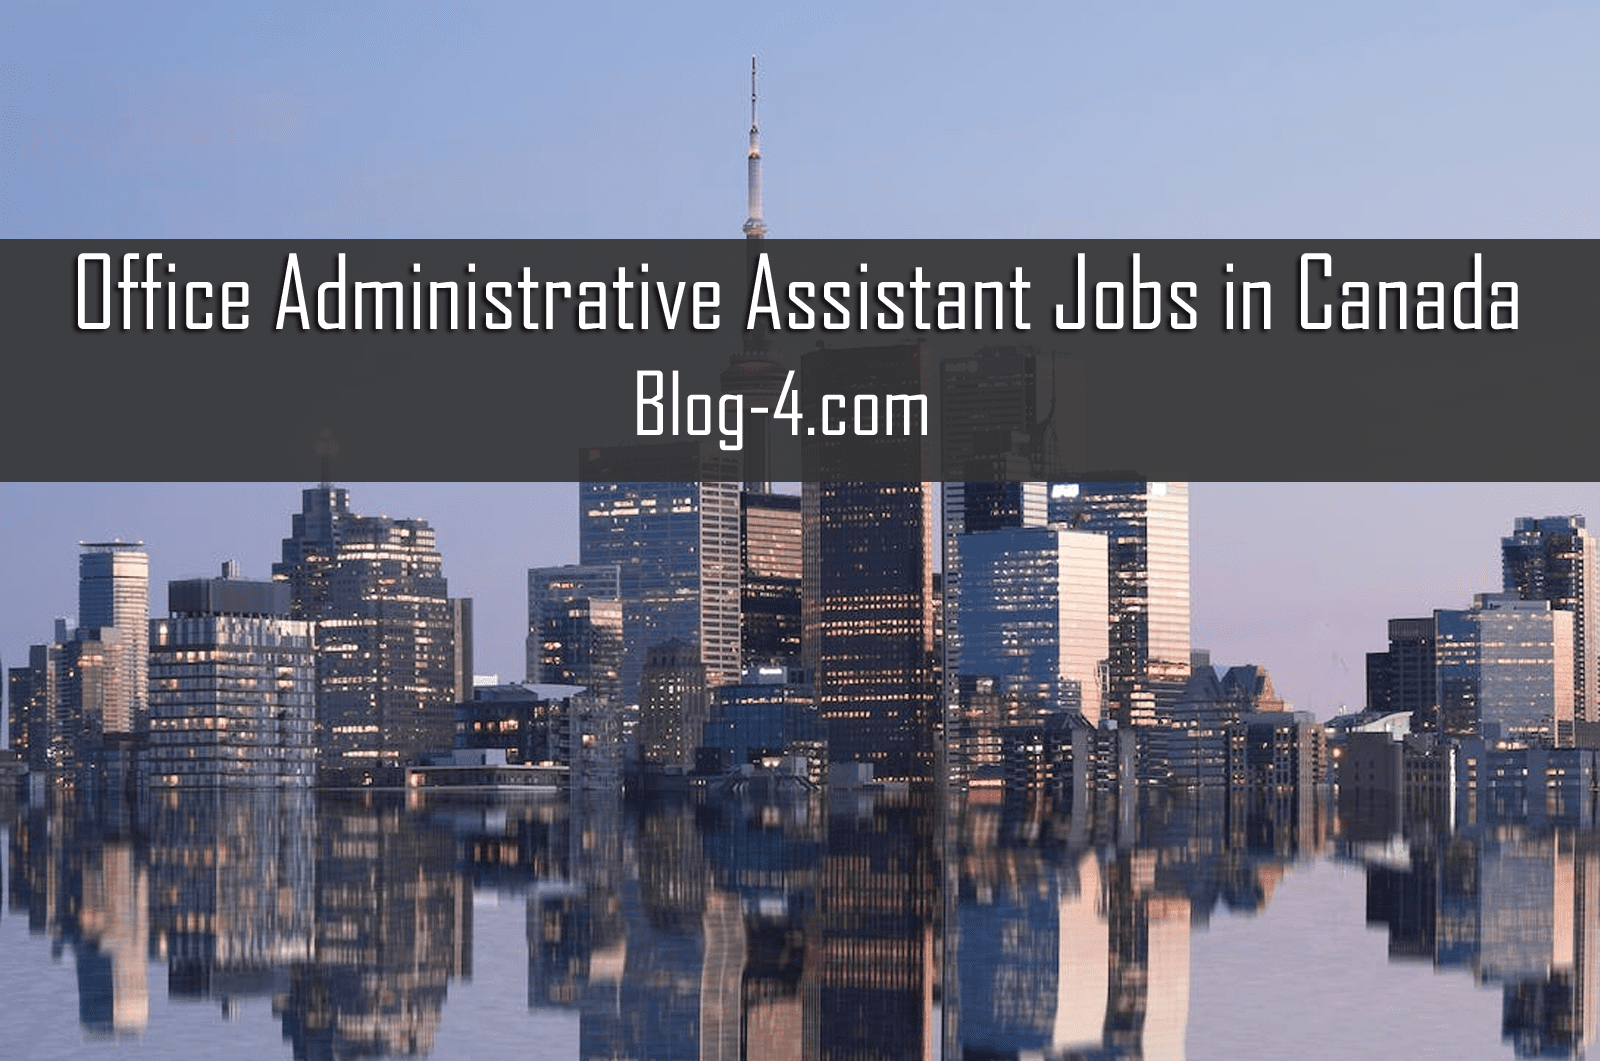 Office Administrative Assistant Jobs in Canada